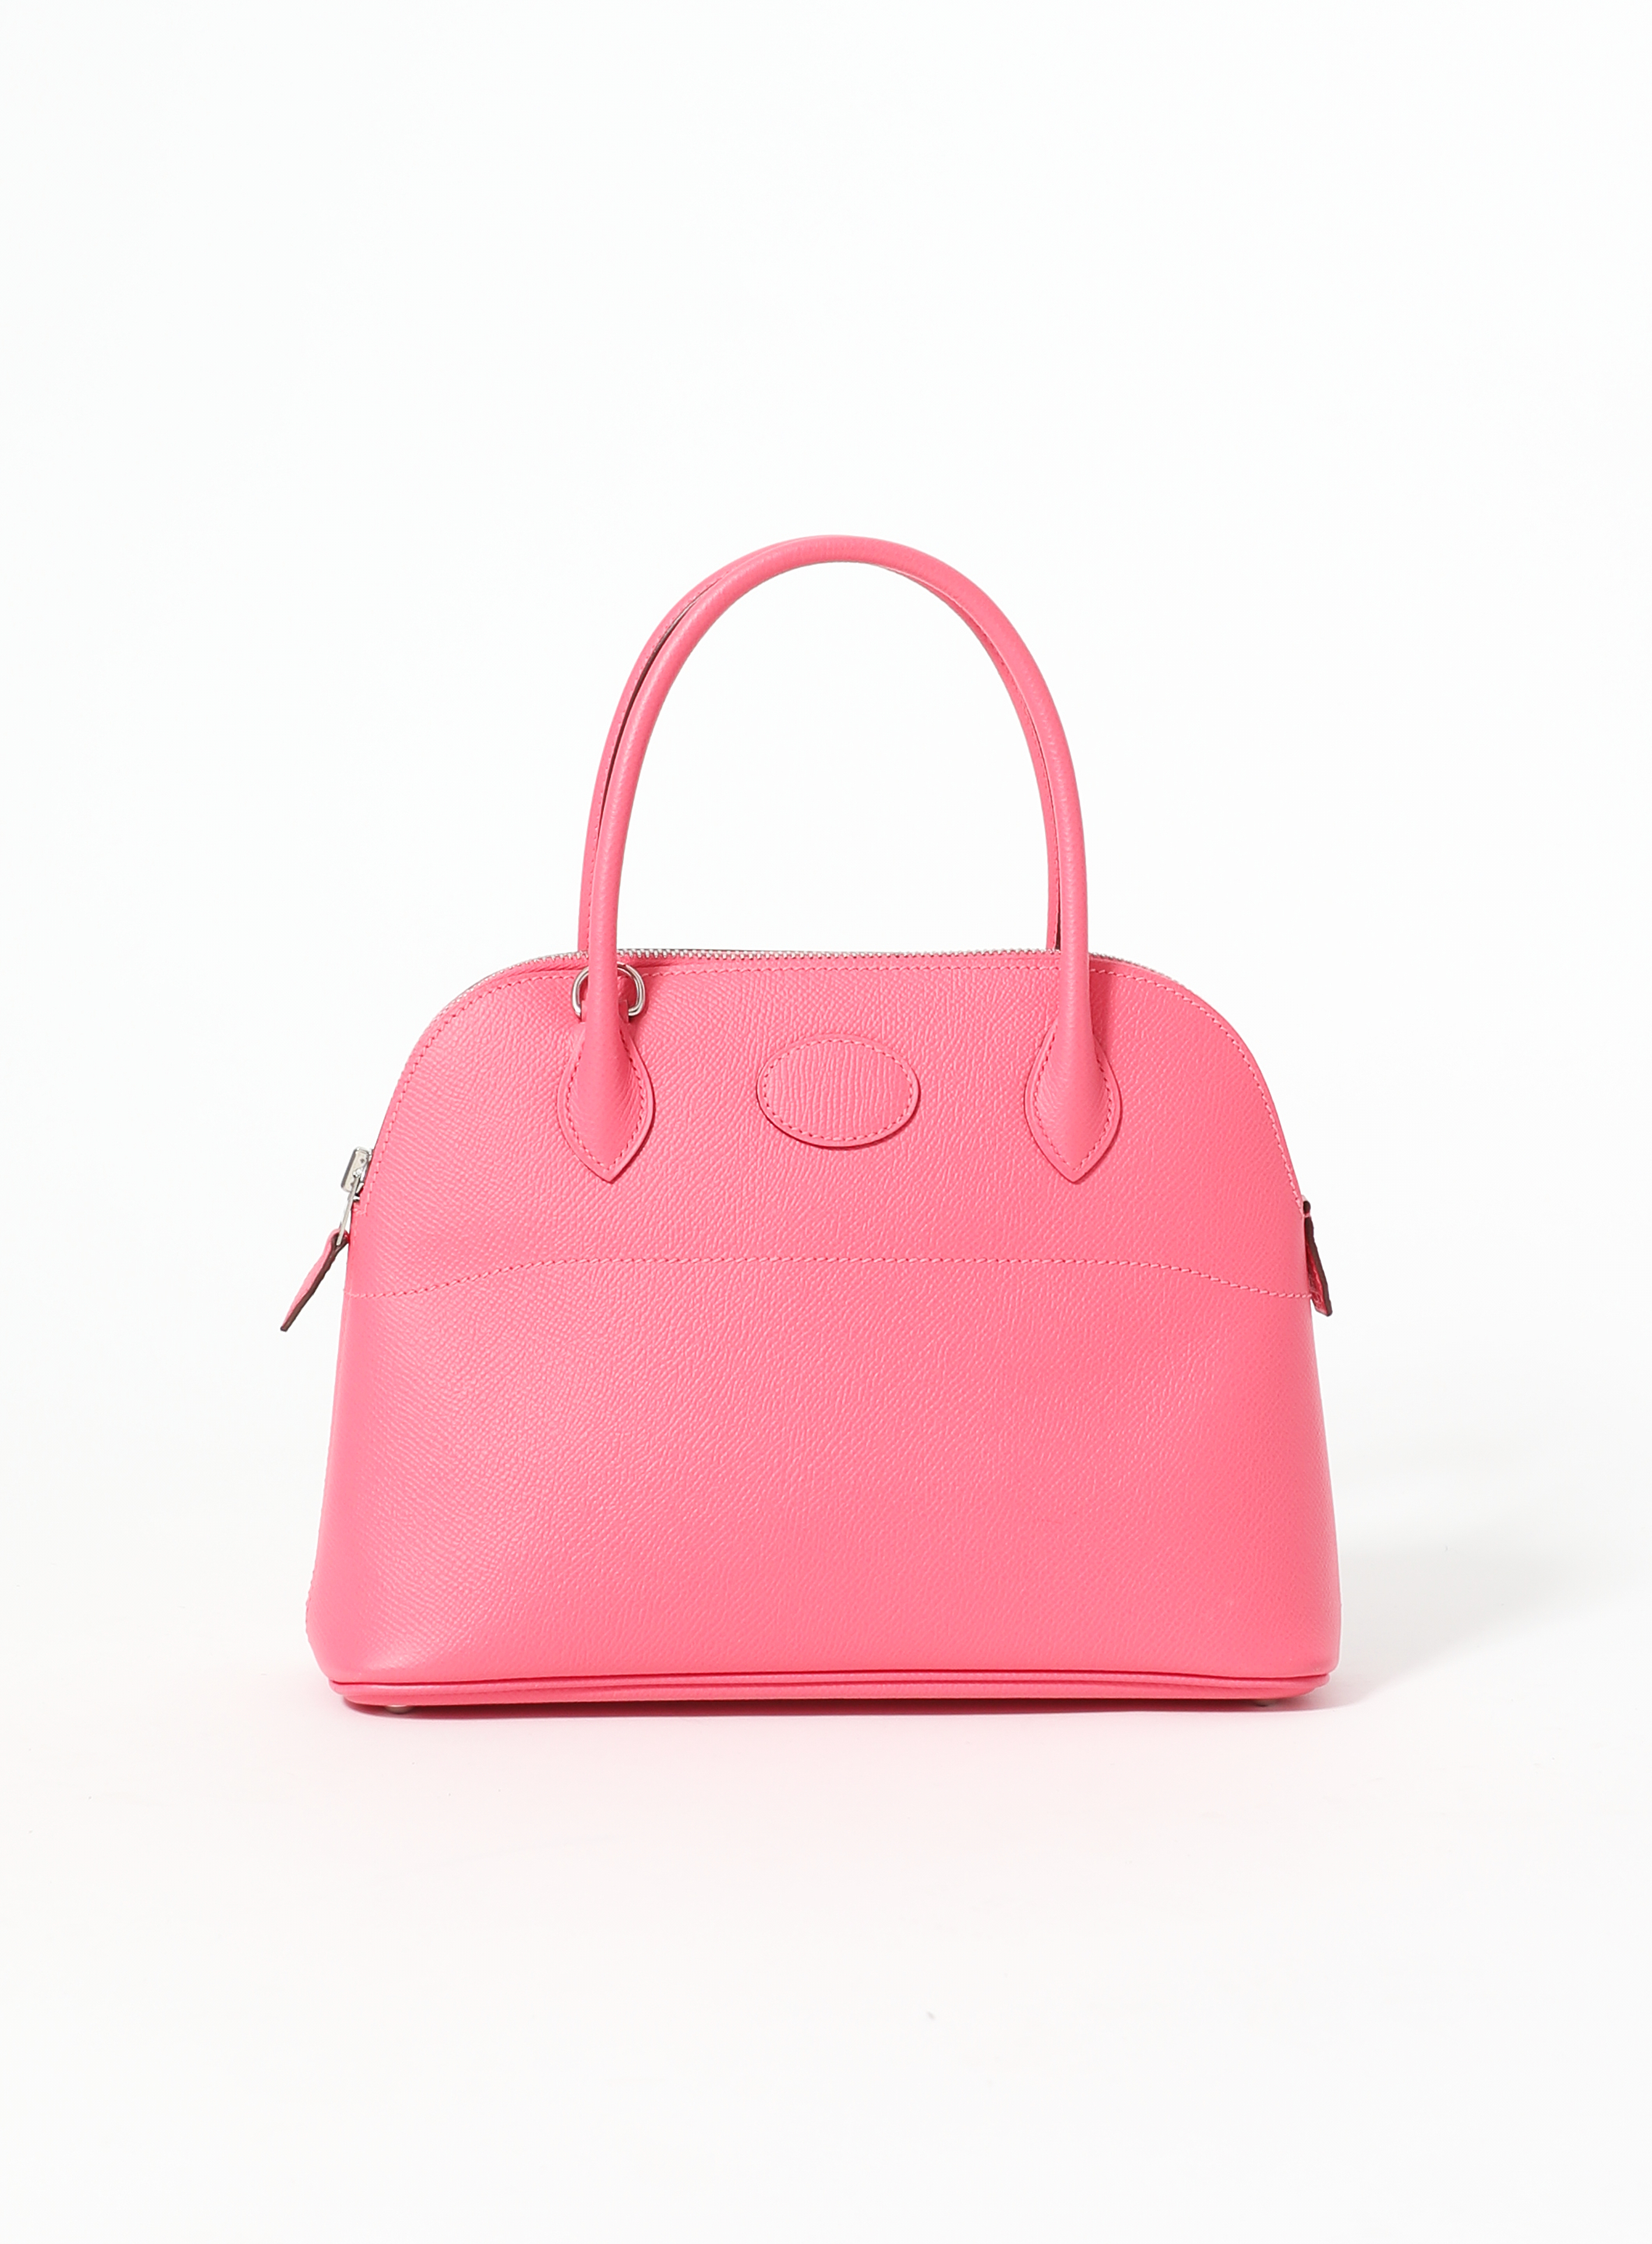 Hermes Bolide Mini Bag, In Rose Azalee, Pink With Palladium